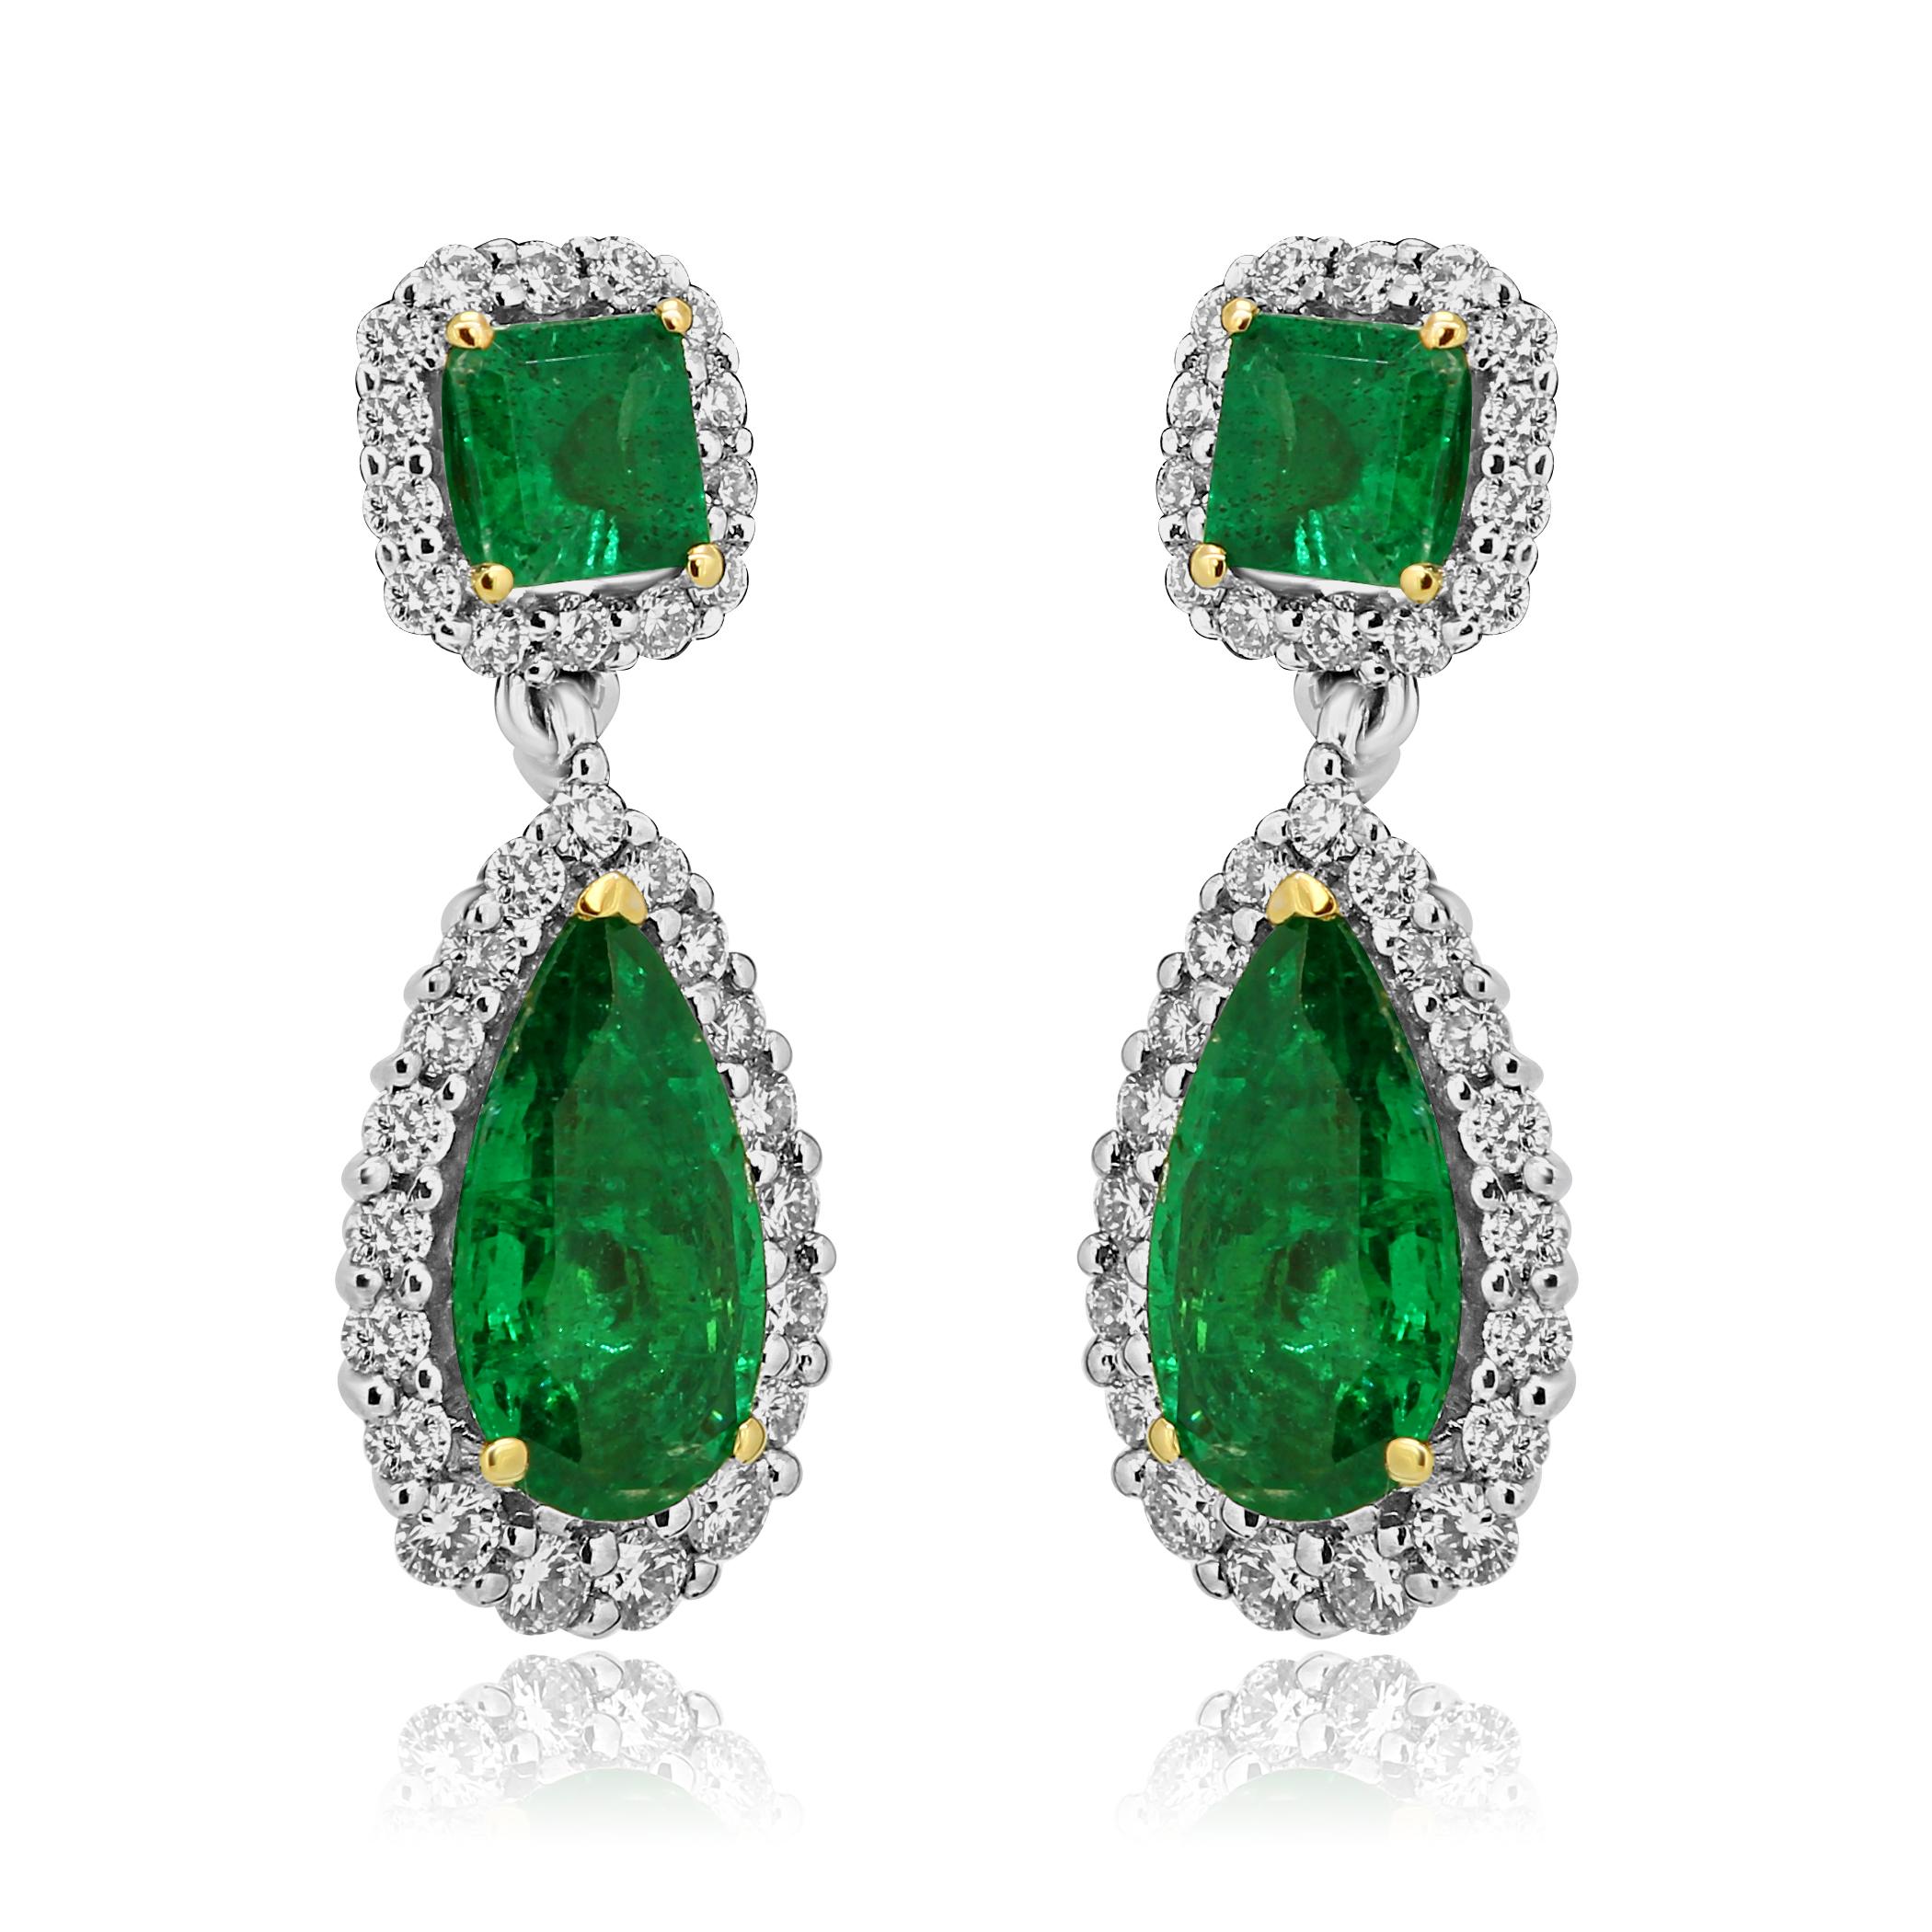 2 Emerald Pear Shape 2.06 Carat and 2 Emerald Squares  0.85 Carat Encircled in a Single Halo of White Round Brilliant Diamonds in Stunning Hand Made 14K White and Yellow Gold Dangle Drop Earrings.

Style available in different price ranges. Prices